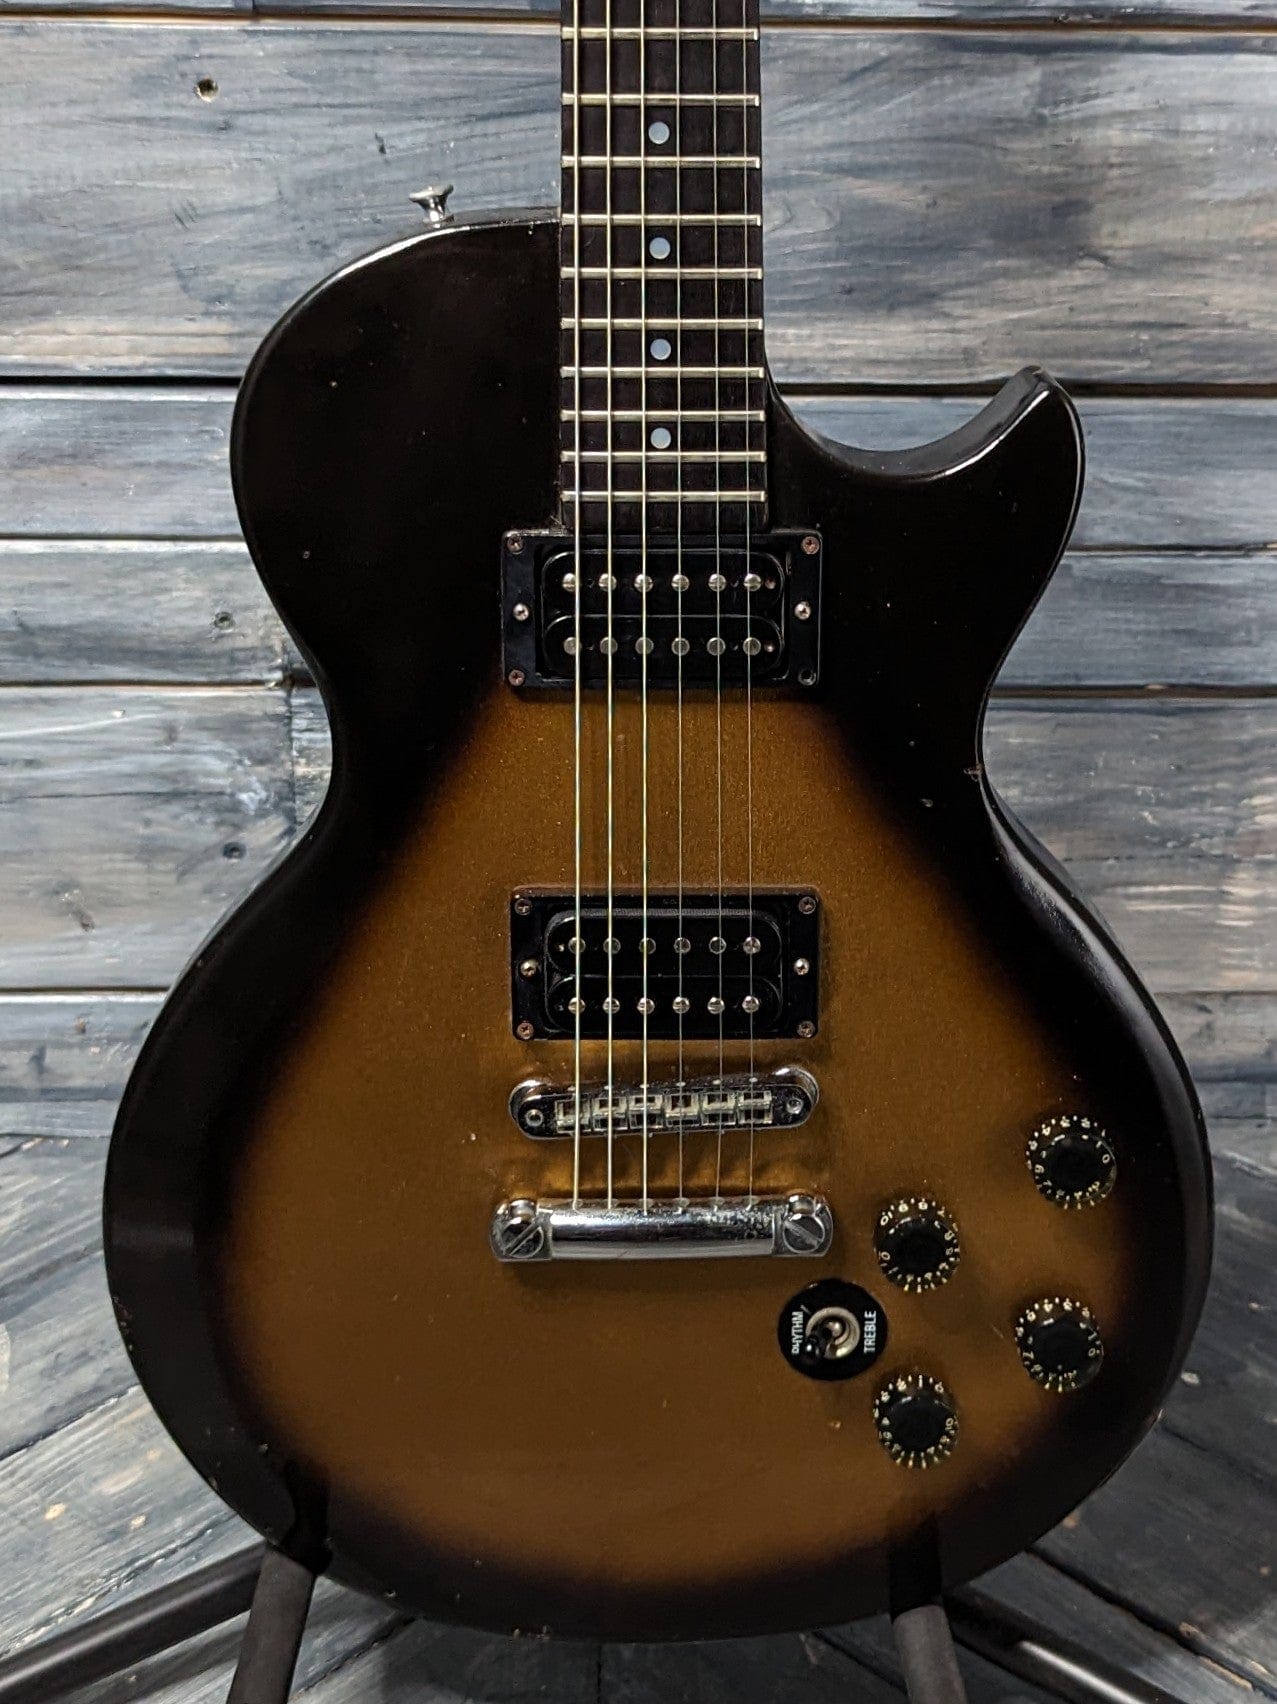 Used Gibson Les Paul Firebrand close up of body